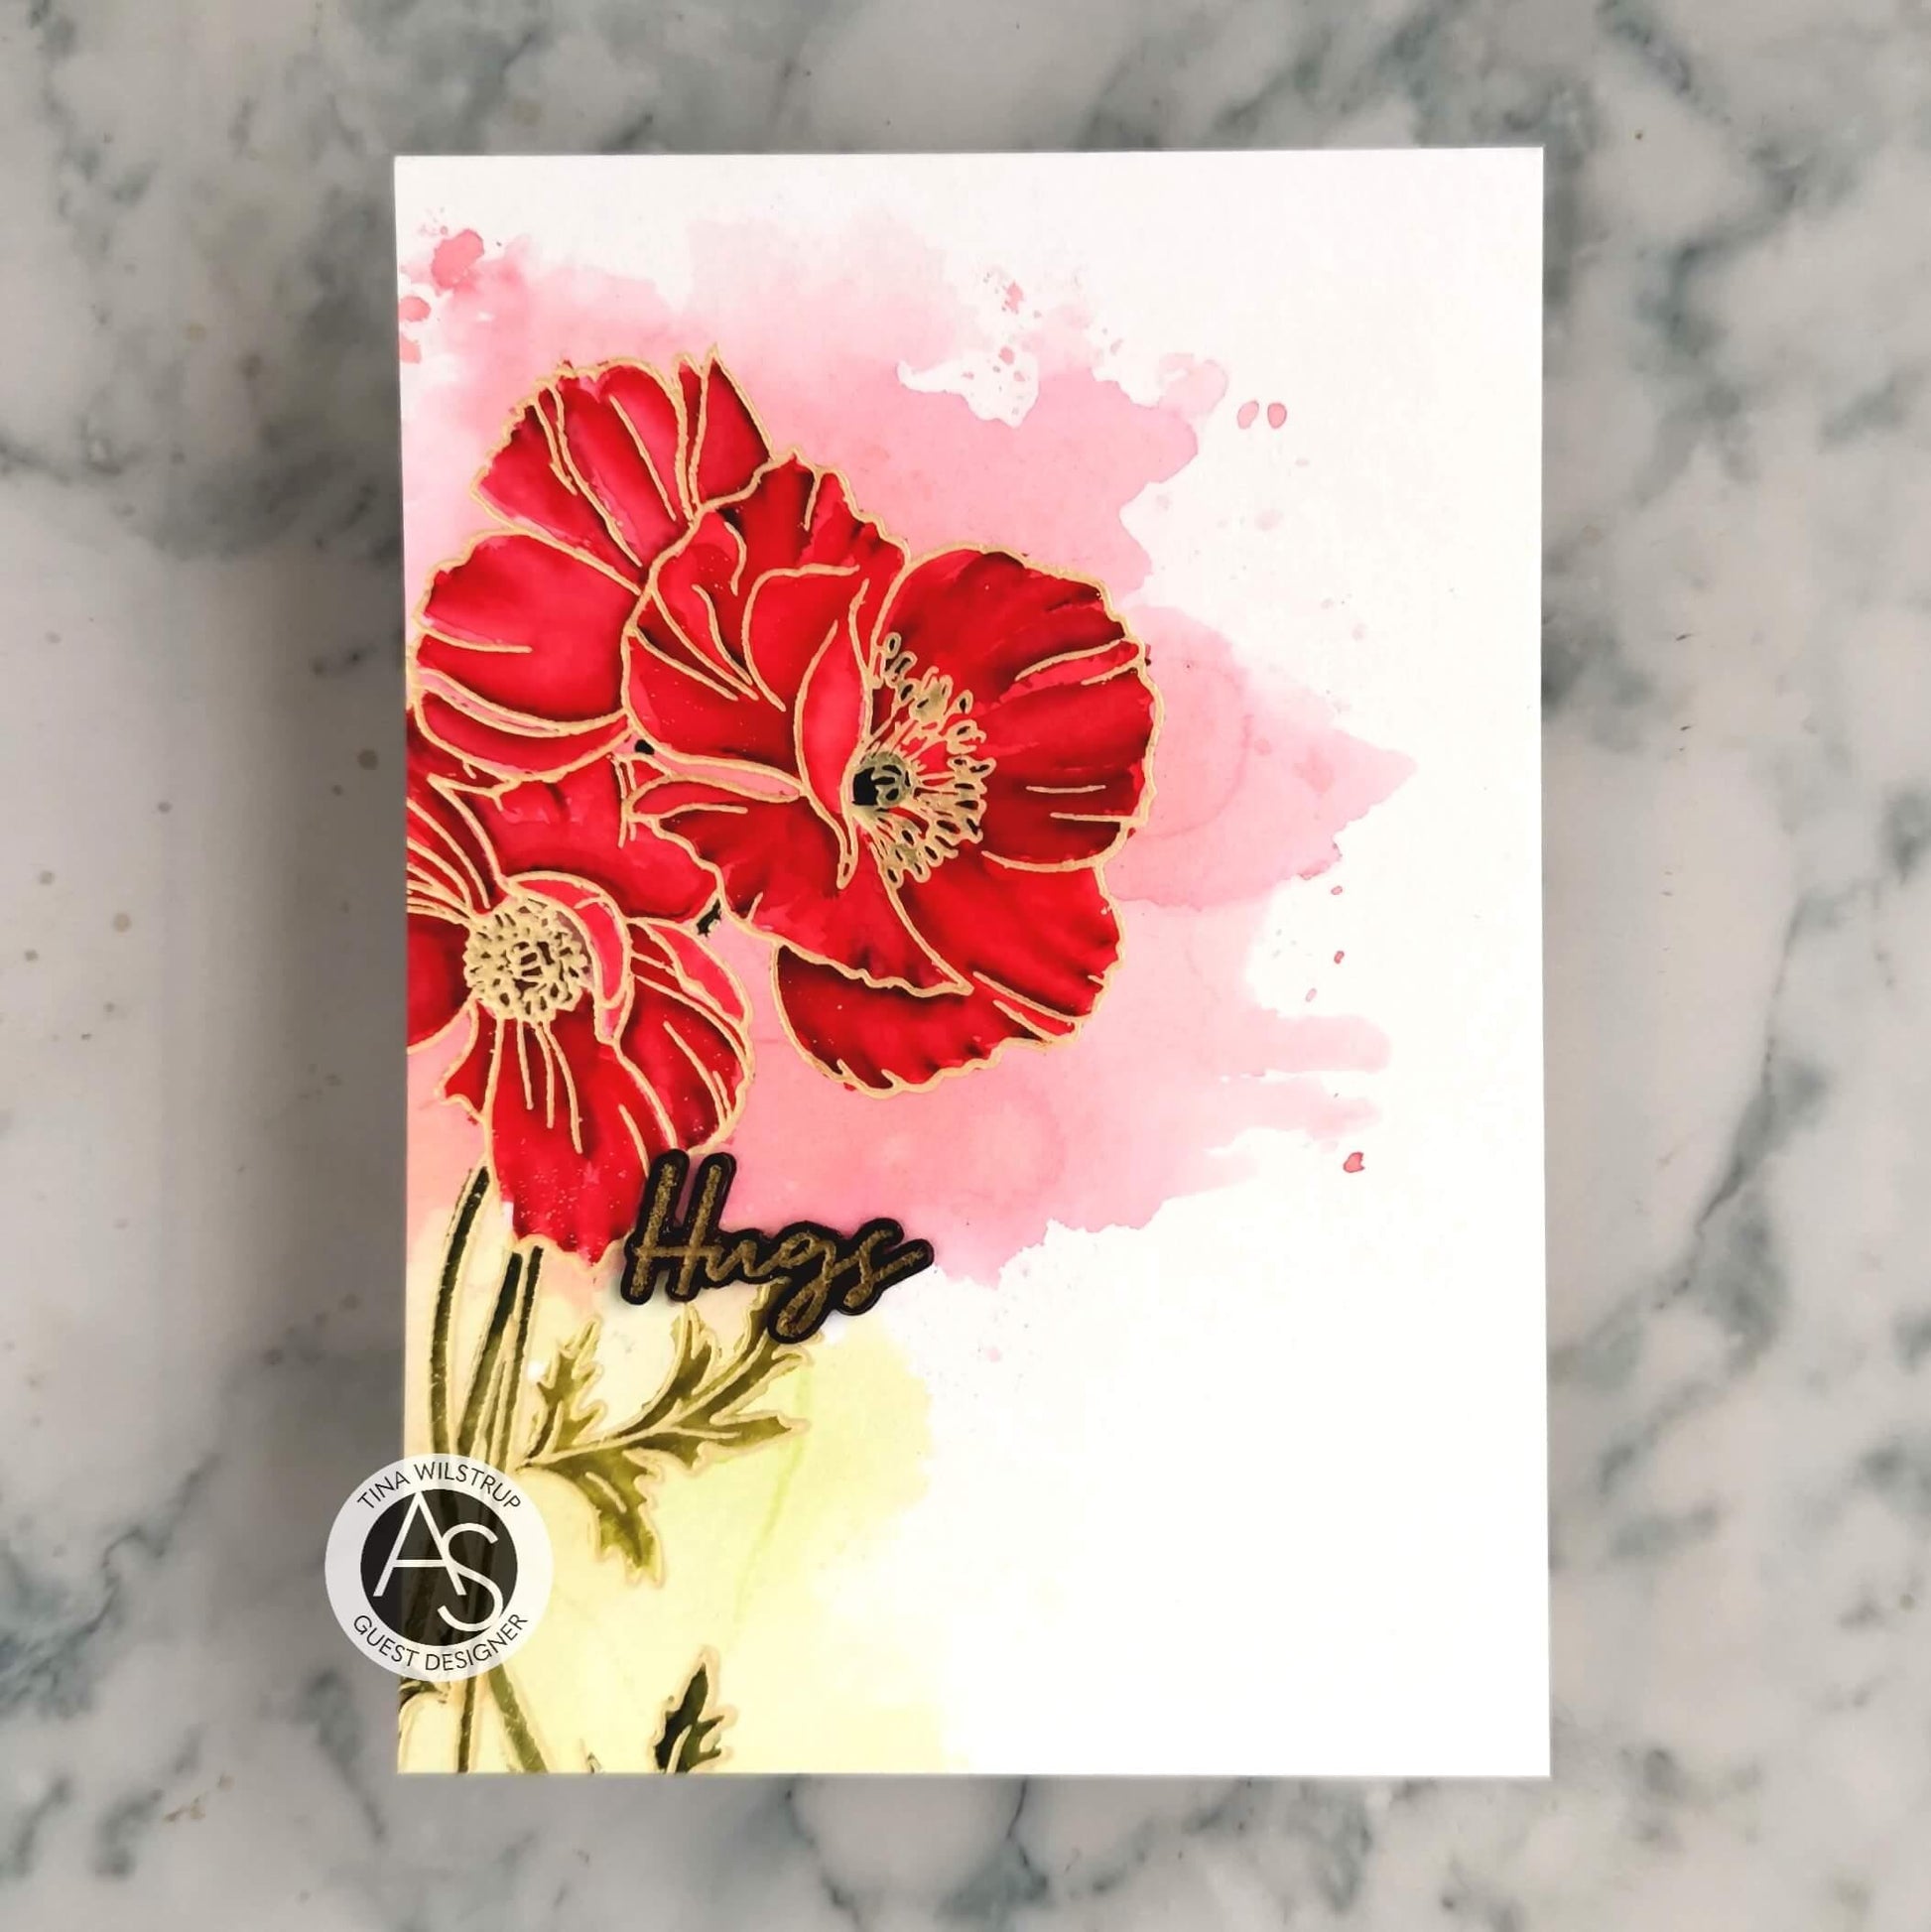 Cindy-Poppies-Stamp-alex-syberia-designs-flowers-cardmaking-coloring-dies-stencils-cascards-embossing-techinque